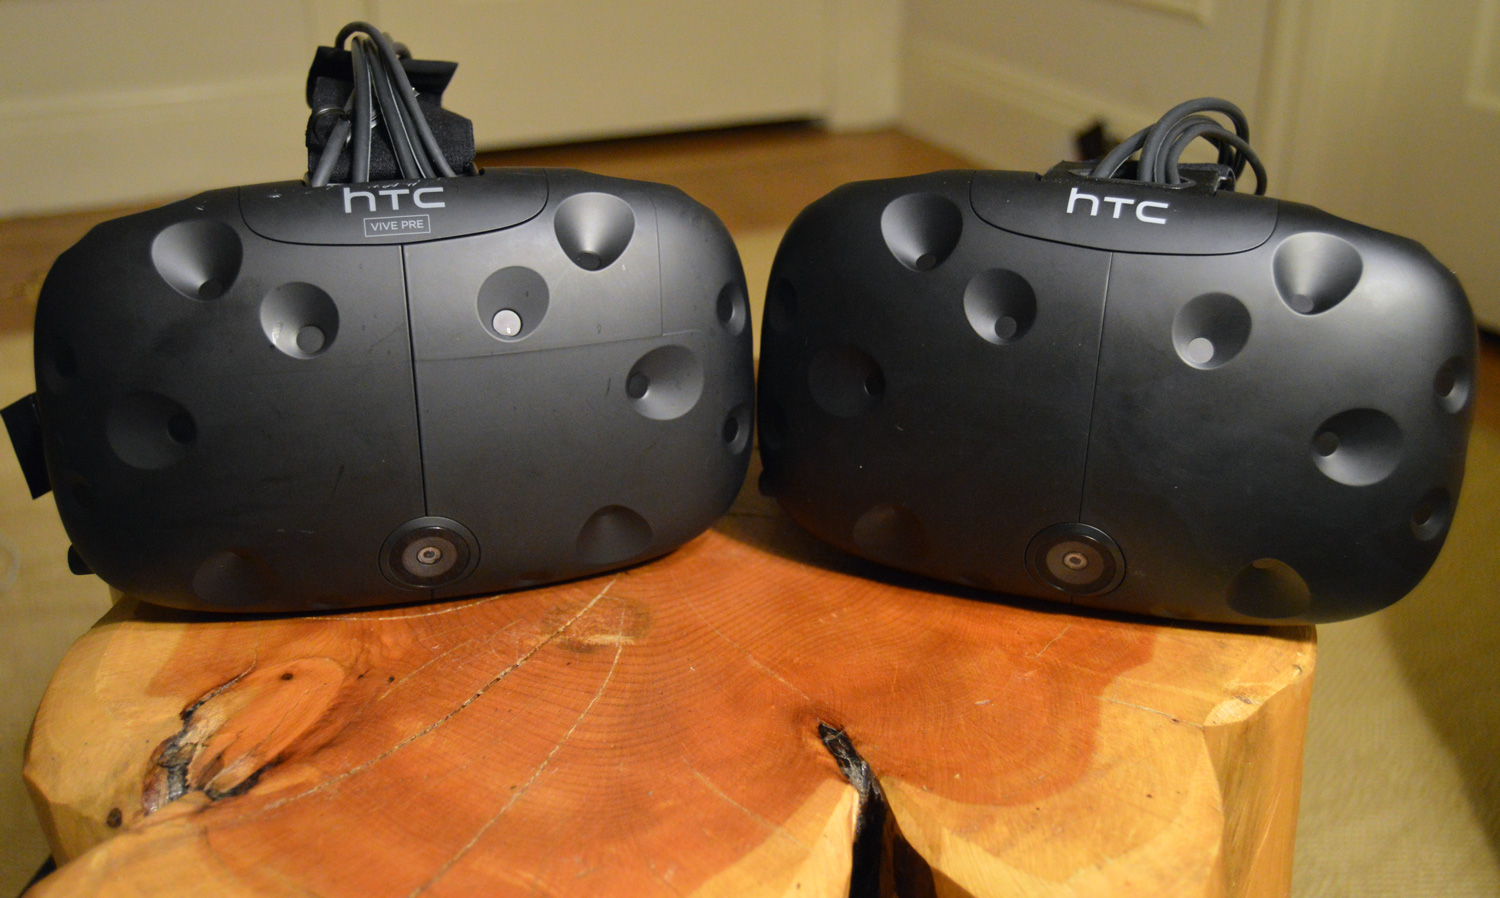 The HTC Vive Pre (Left) and the HTC Vive consumer edition (Right) are nearly identical. 